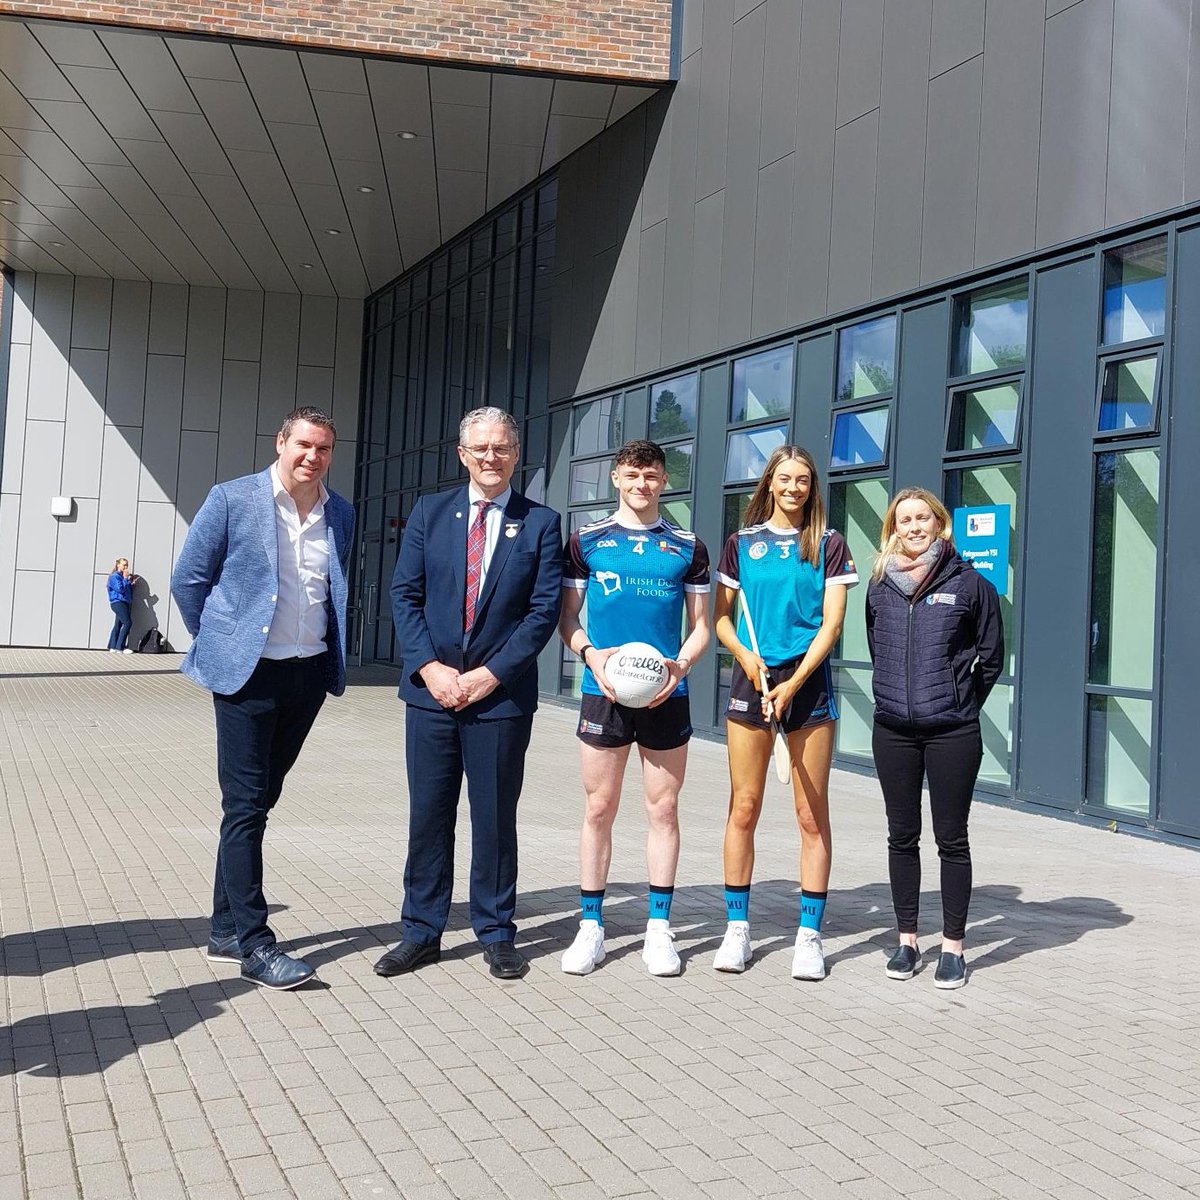 MU is happy to welcome the @officialgaa President Jarlath Burns to our campus this morning ⚽☀️